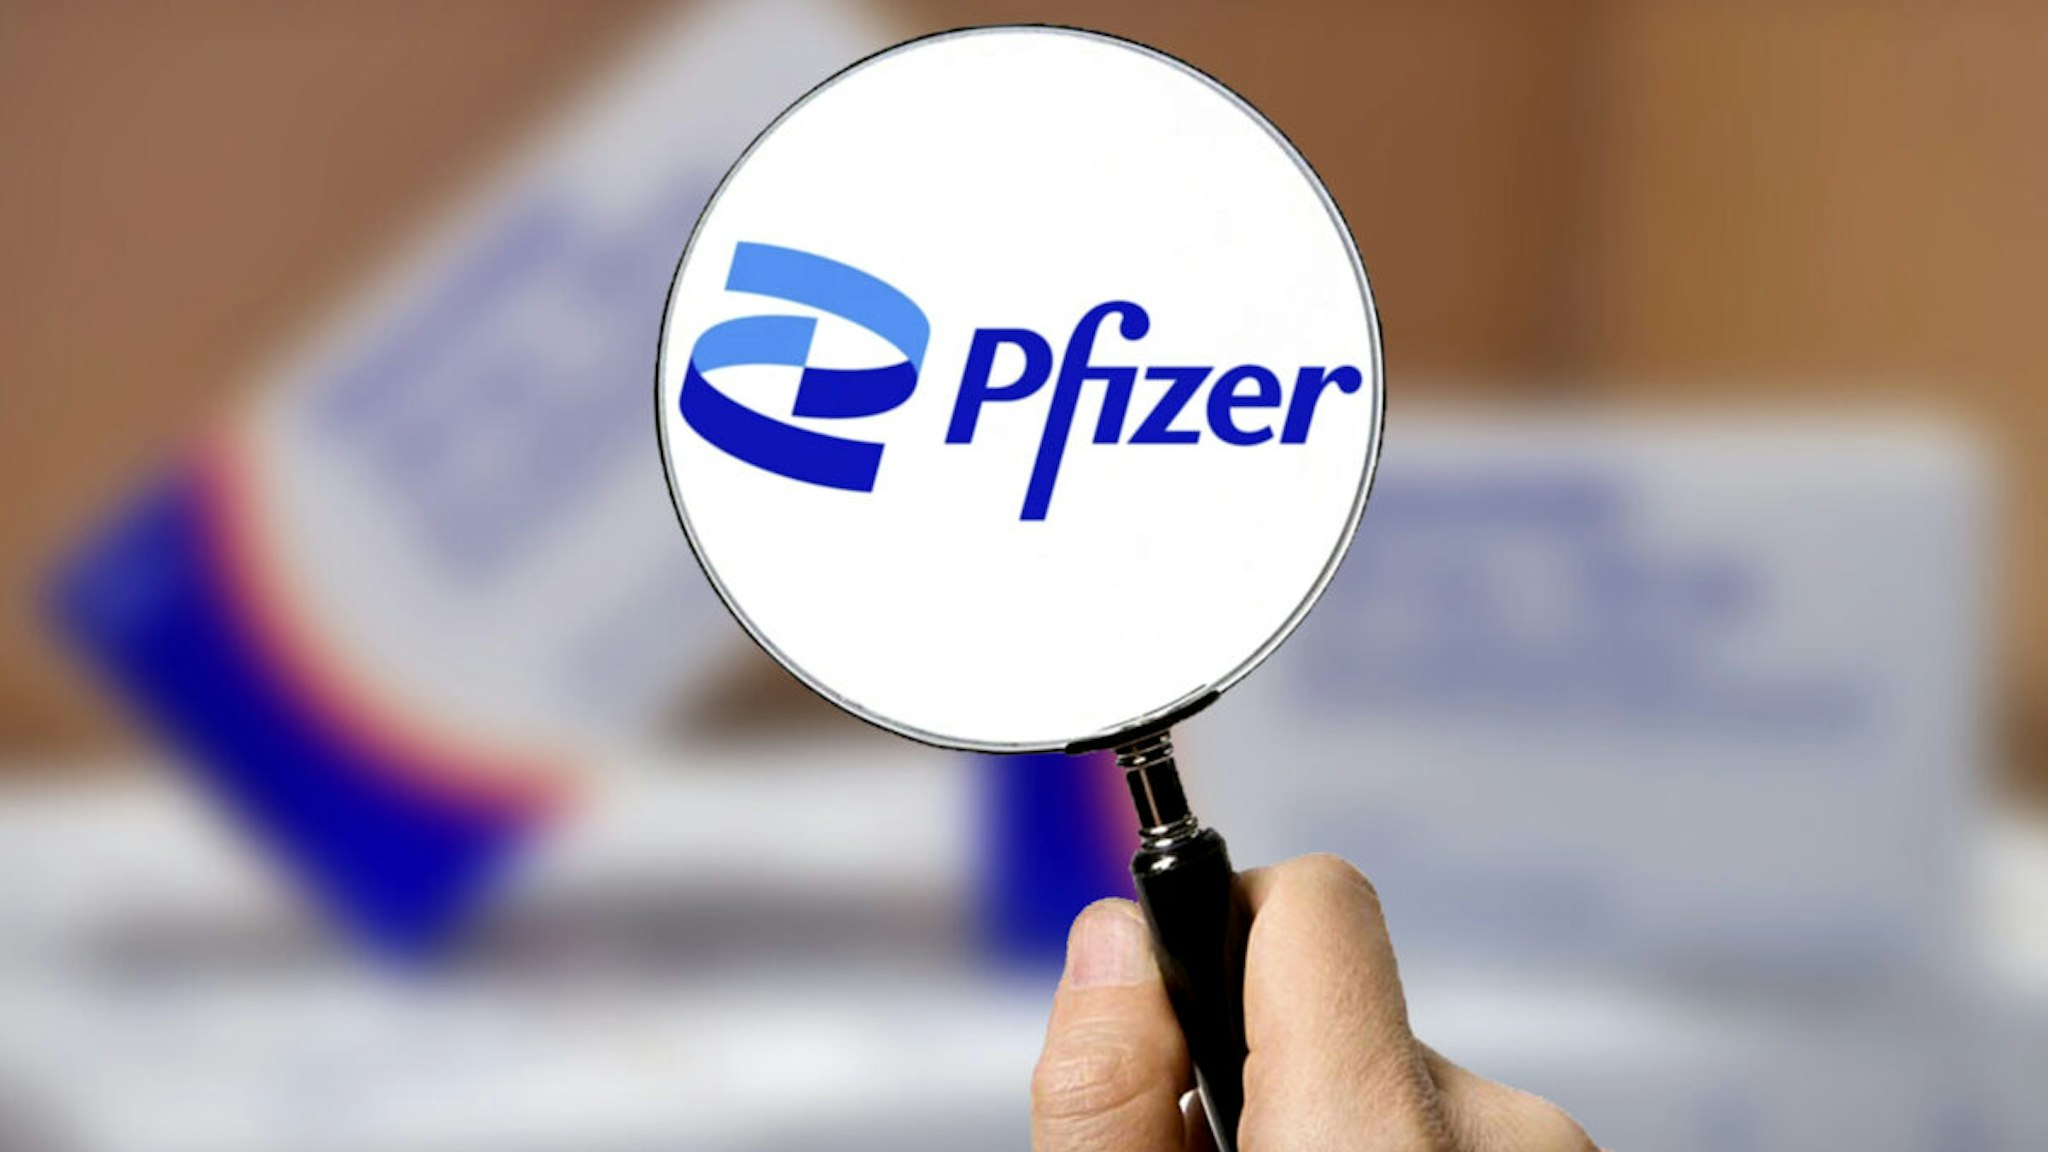 Pfizer COVID-19 specific drug are sold at an online pharmacy in Suqian, Jiangsu province, China, Dec 13, 2022.